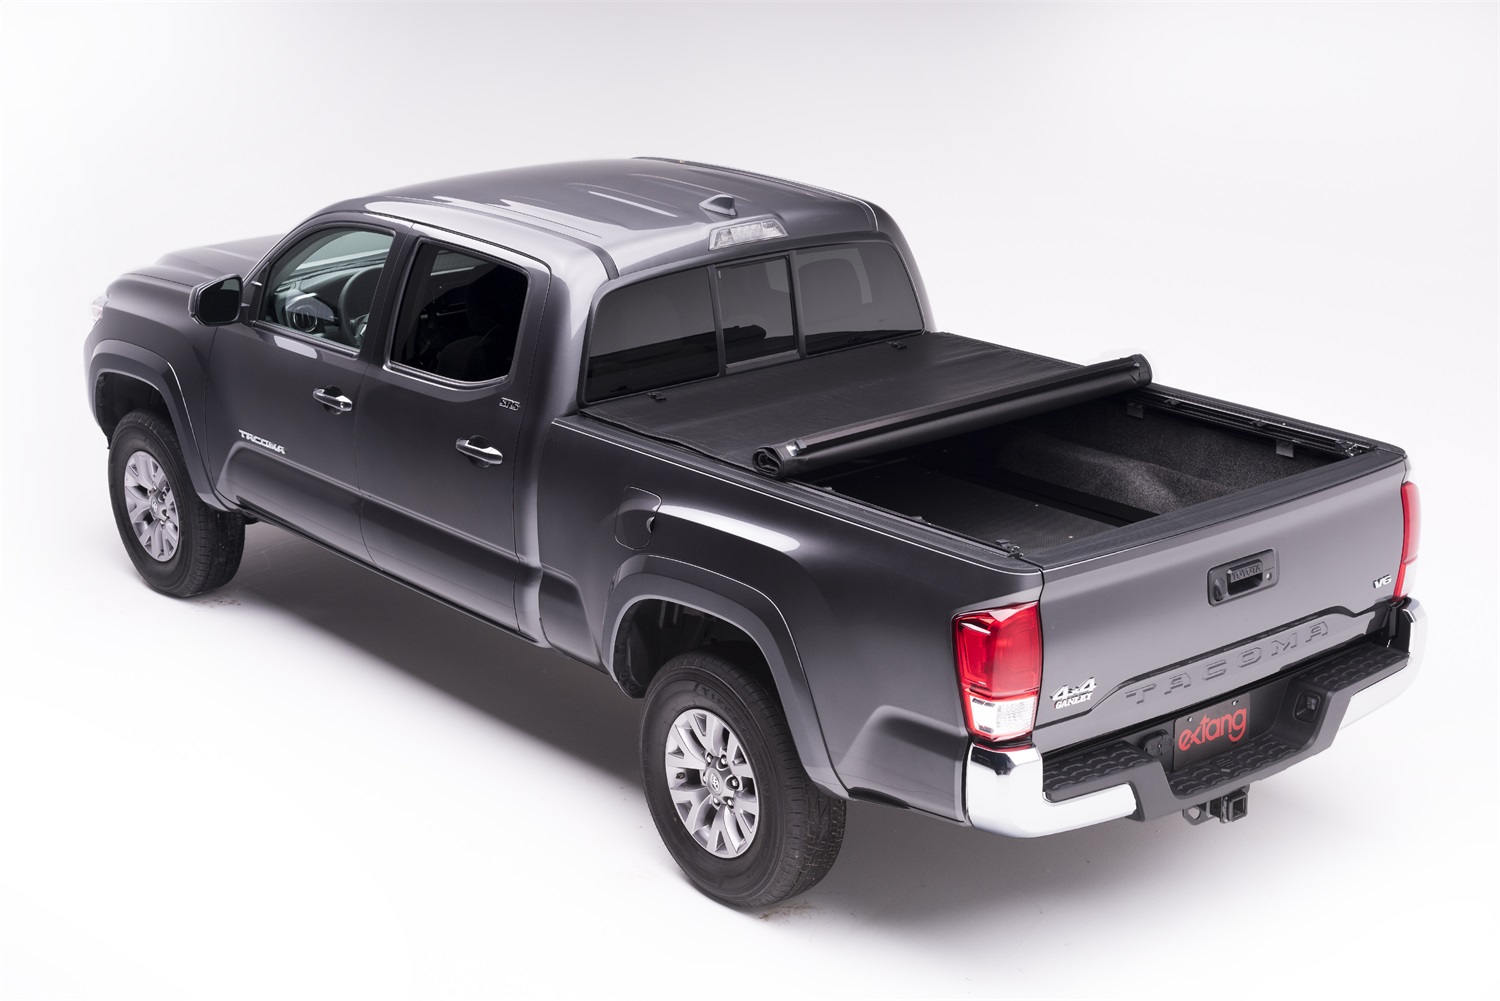 Revolution Low-Profile Tonneau Cover 1988-2000 Chevy Full-Size Truck (Old Body)